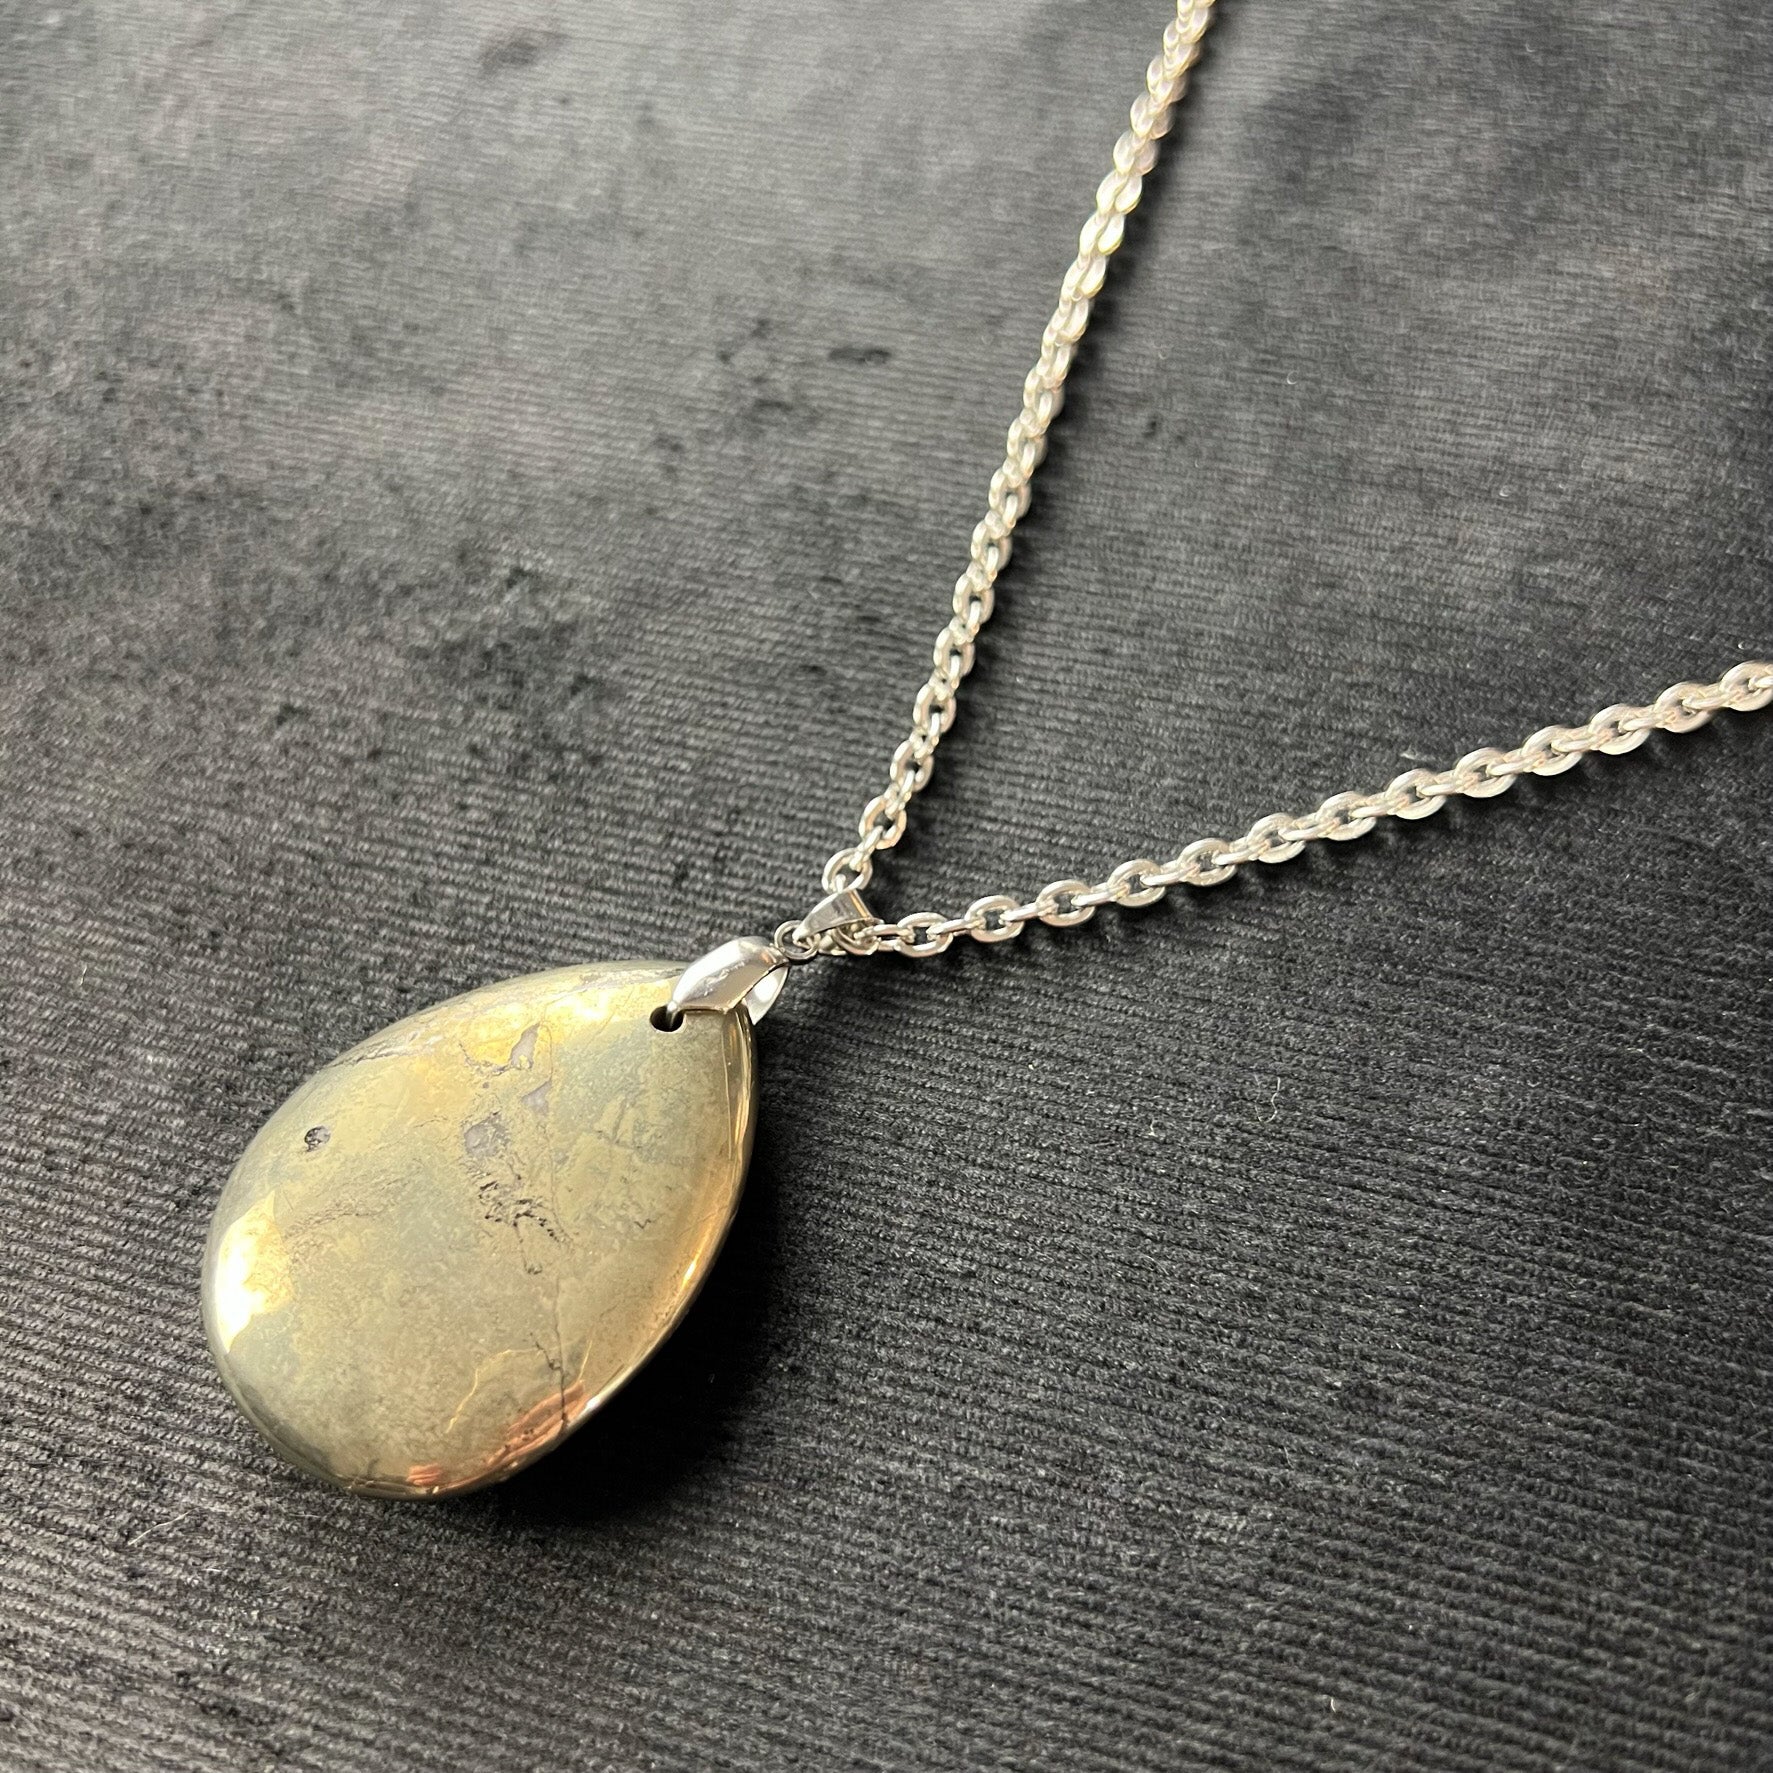 Teardrop Iron Pyrite gemstone and stainless steel necklace